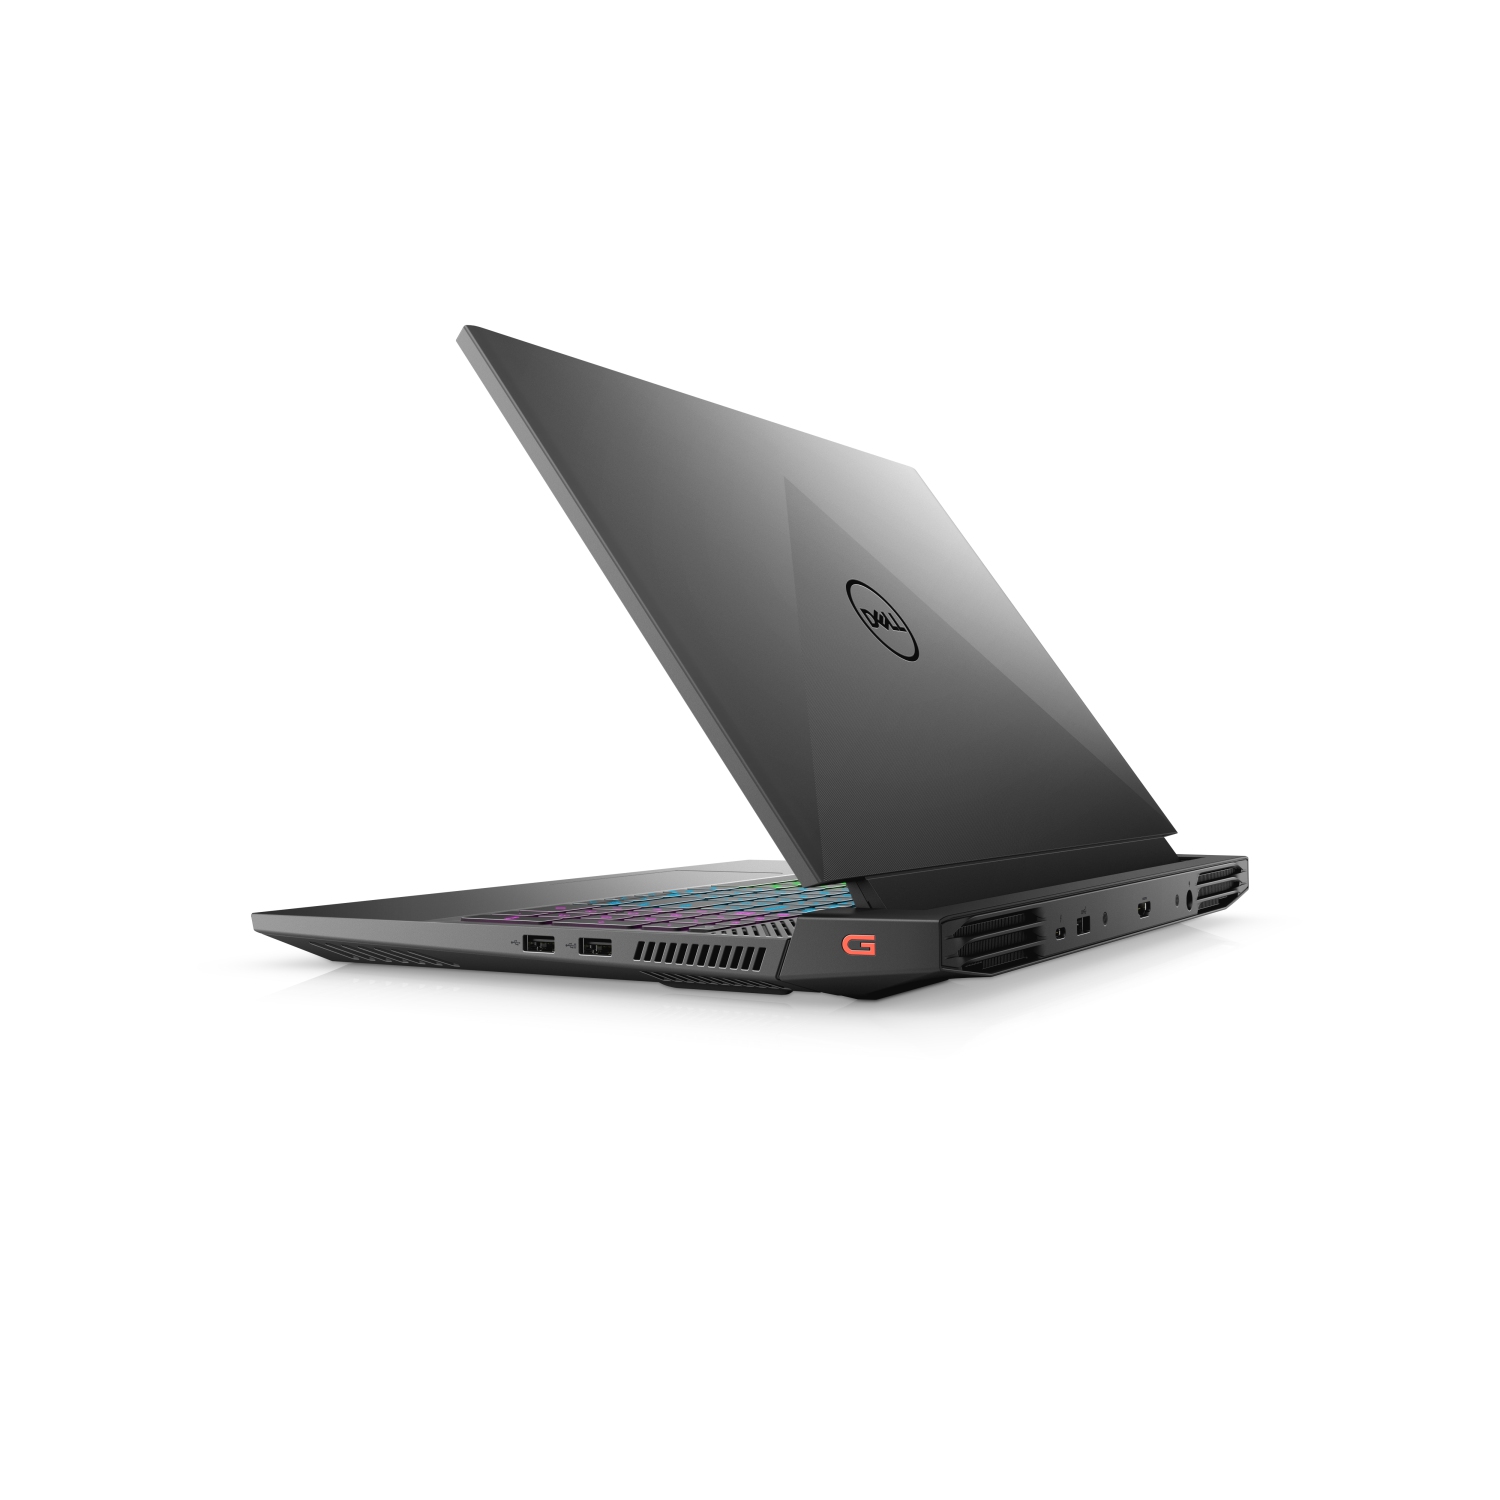 Refurbished (Excellent) – Dell G15 5511 Gaming Laptop (2021) | 15.6" FHD | Core i5 - 256GB SSD - 8GB RAM - RTX 3050 | 6 Cores @ 4.4 GHz - 11th Gen CPU